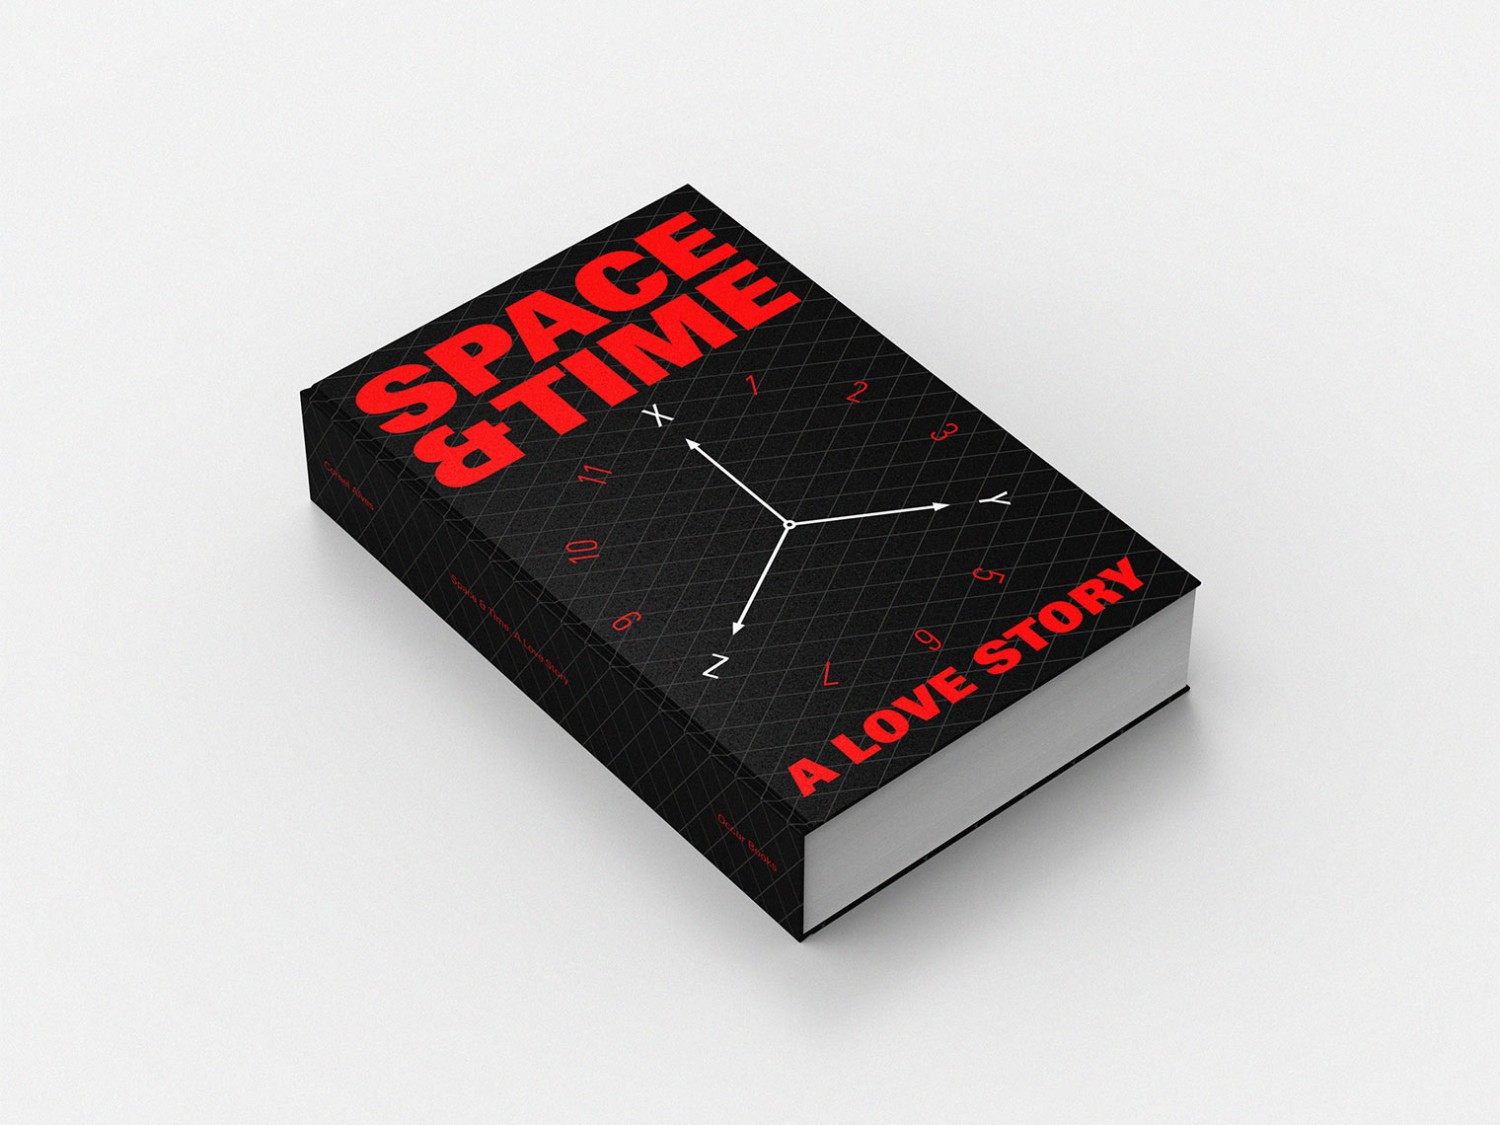 Space & Time: A Love Story